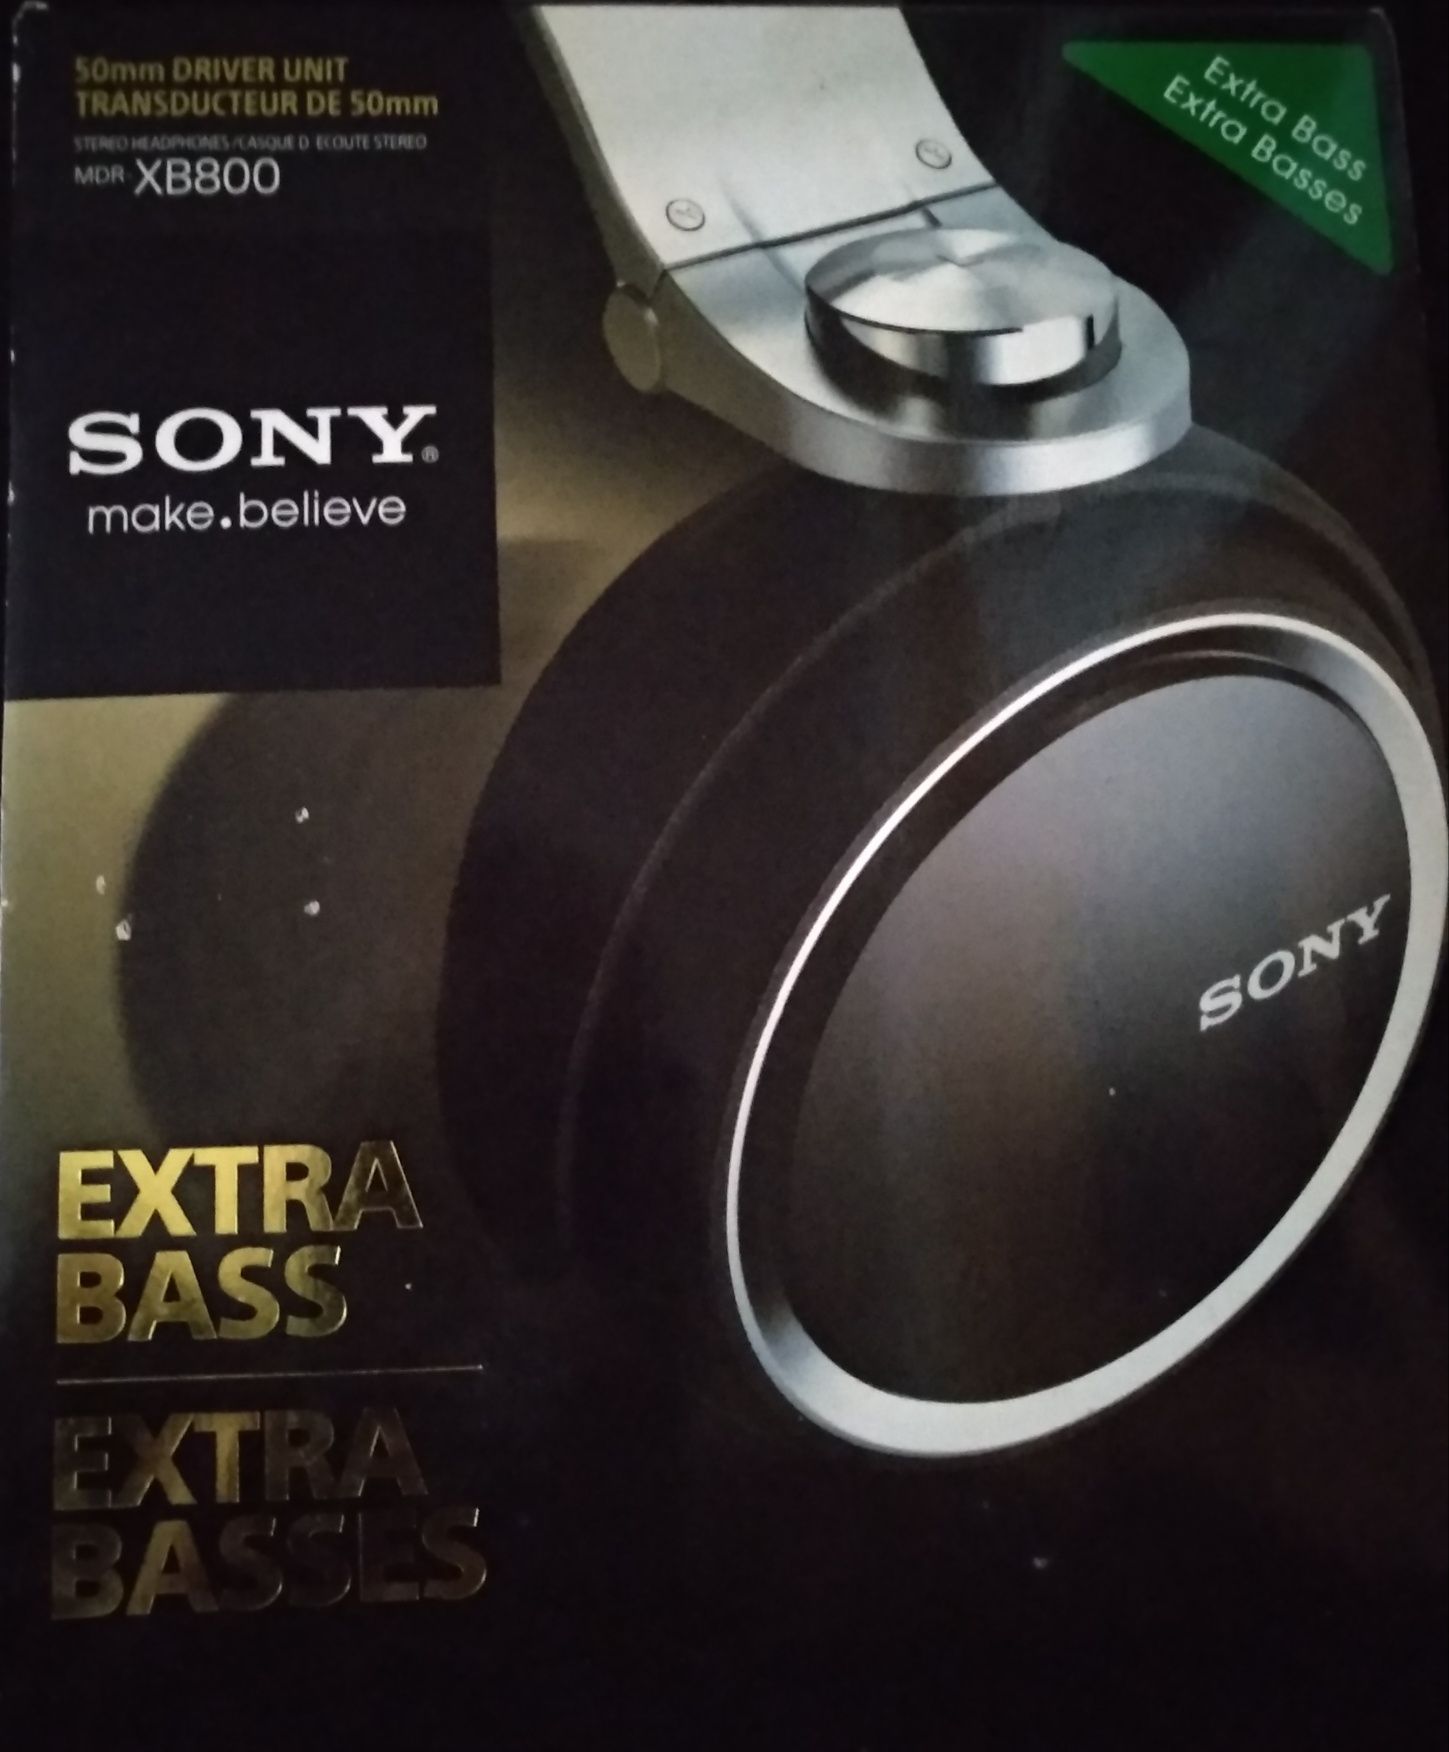 Sony MDR-XB800
On-Ear 50mm Driver Extra Bass XB Series Stereo Headphon